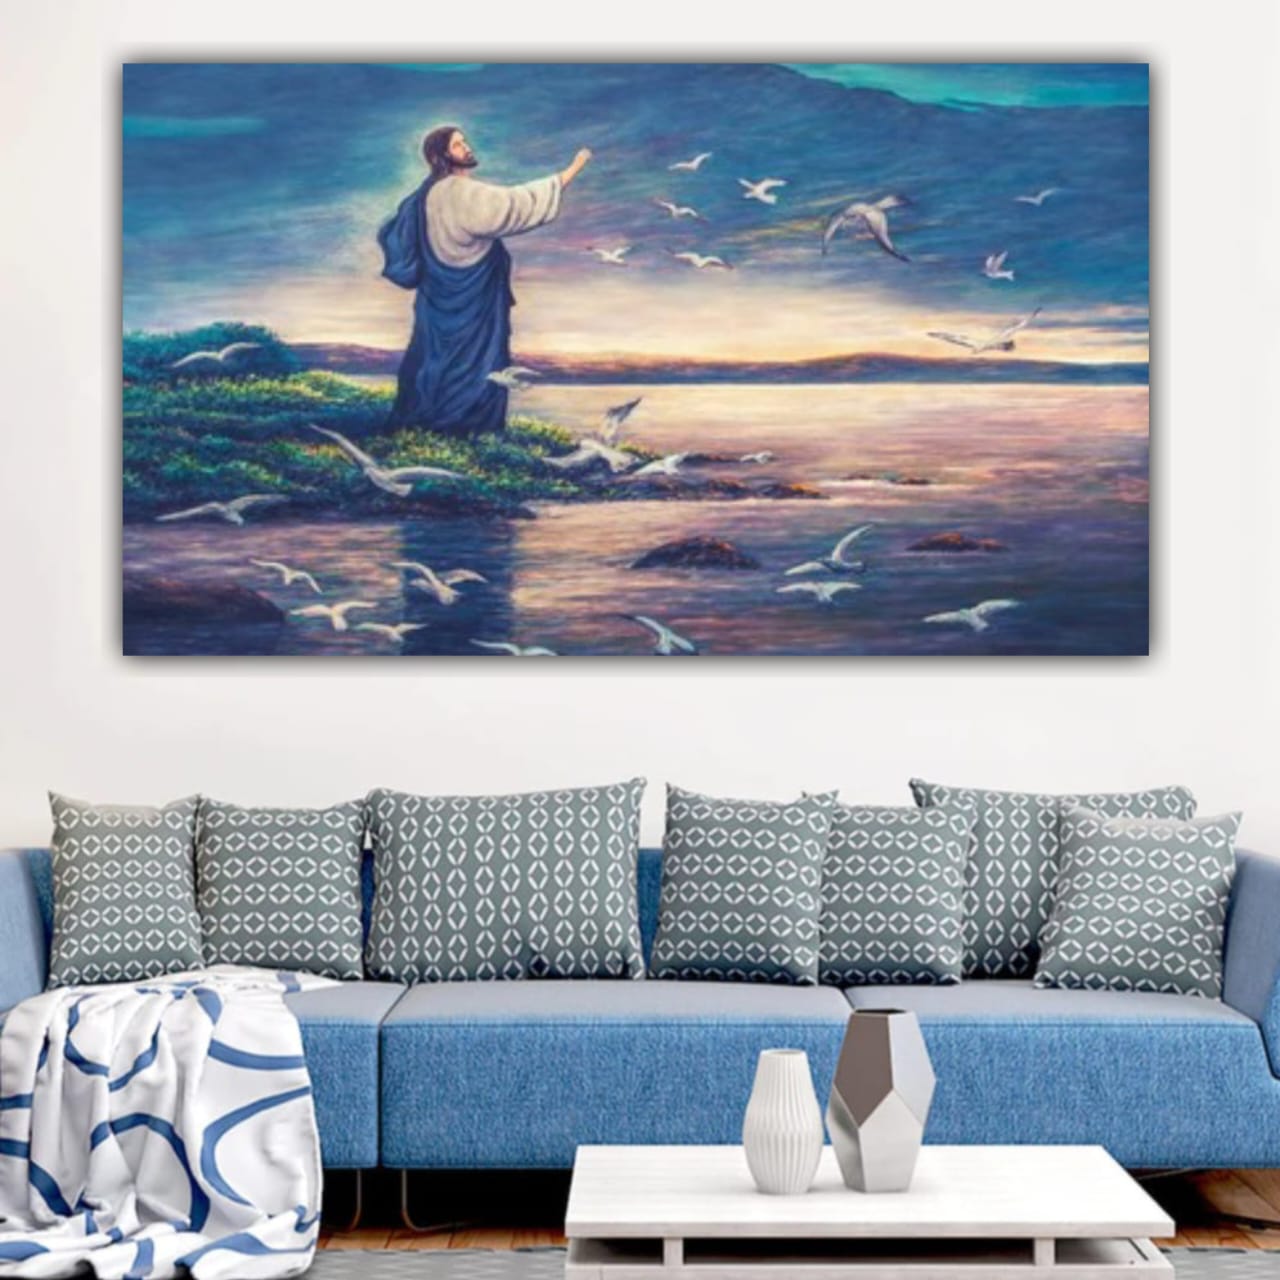 Beautiful Jesus Painting Canvas Wall Frame | Jesus Christ Painting Near A River Bank